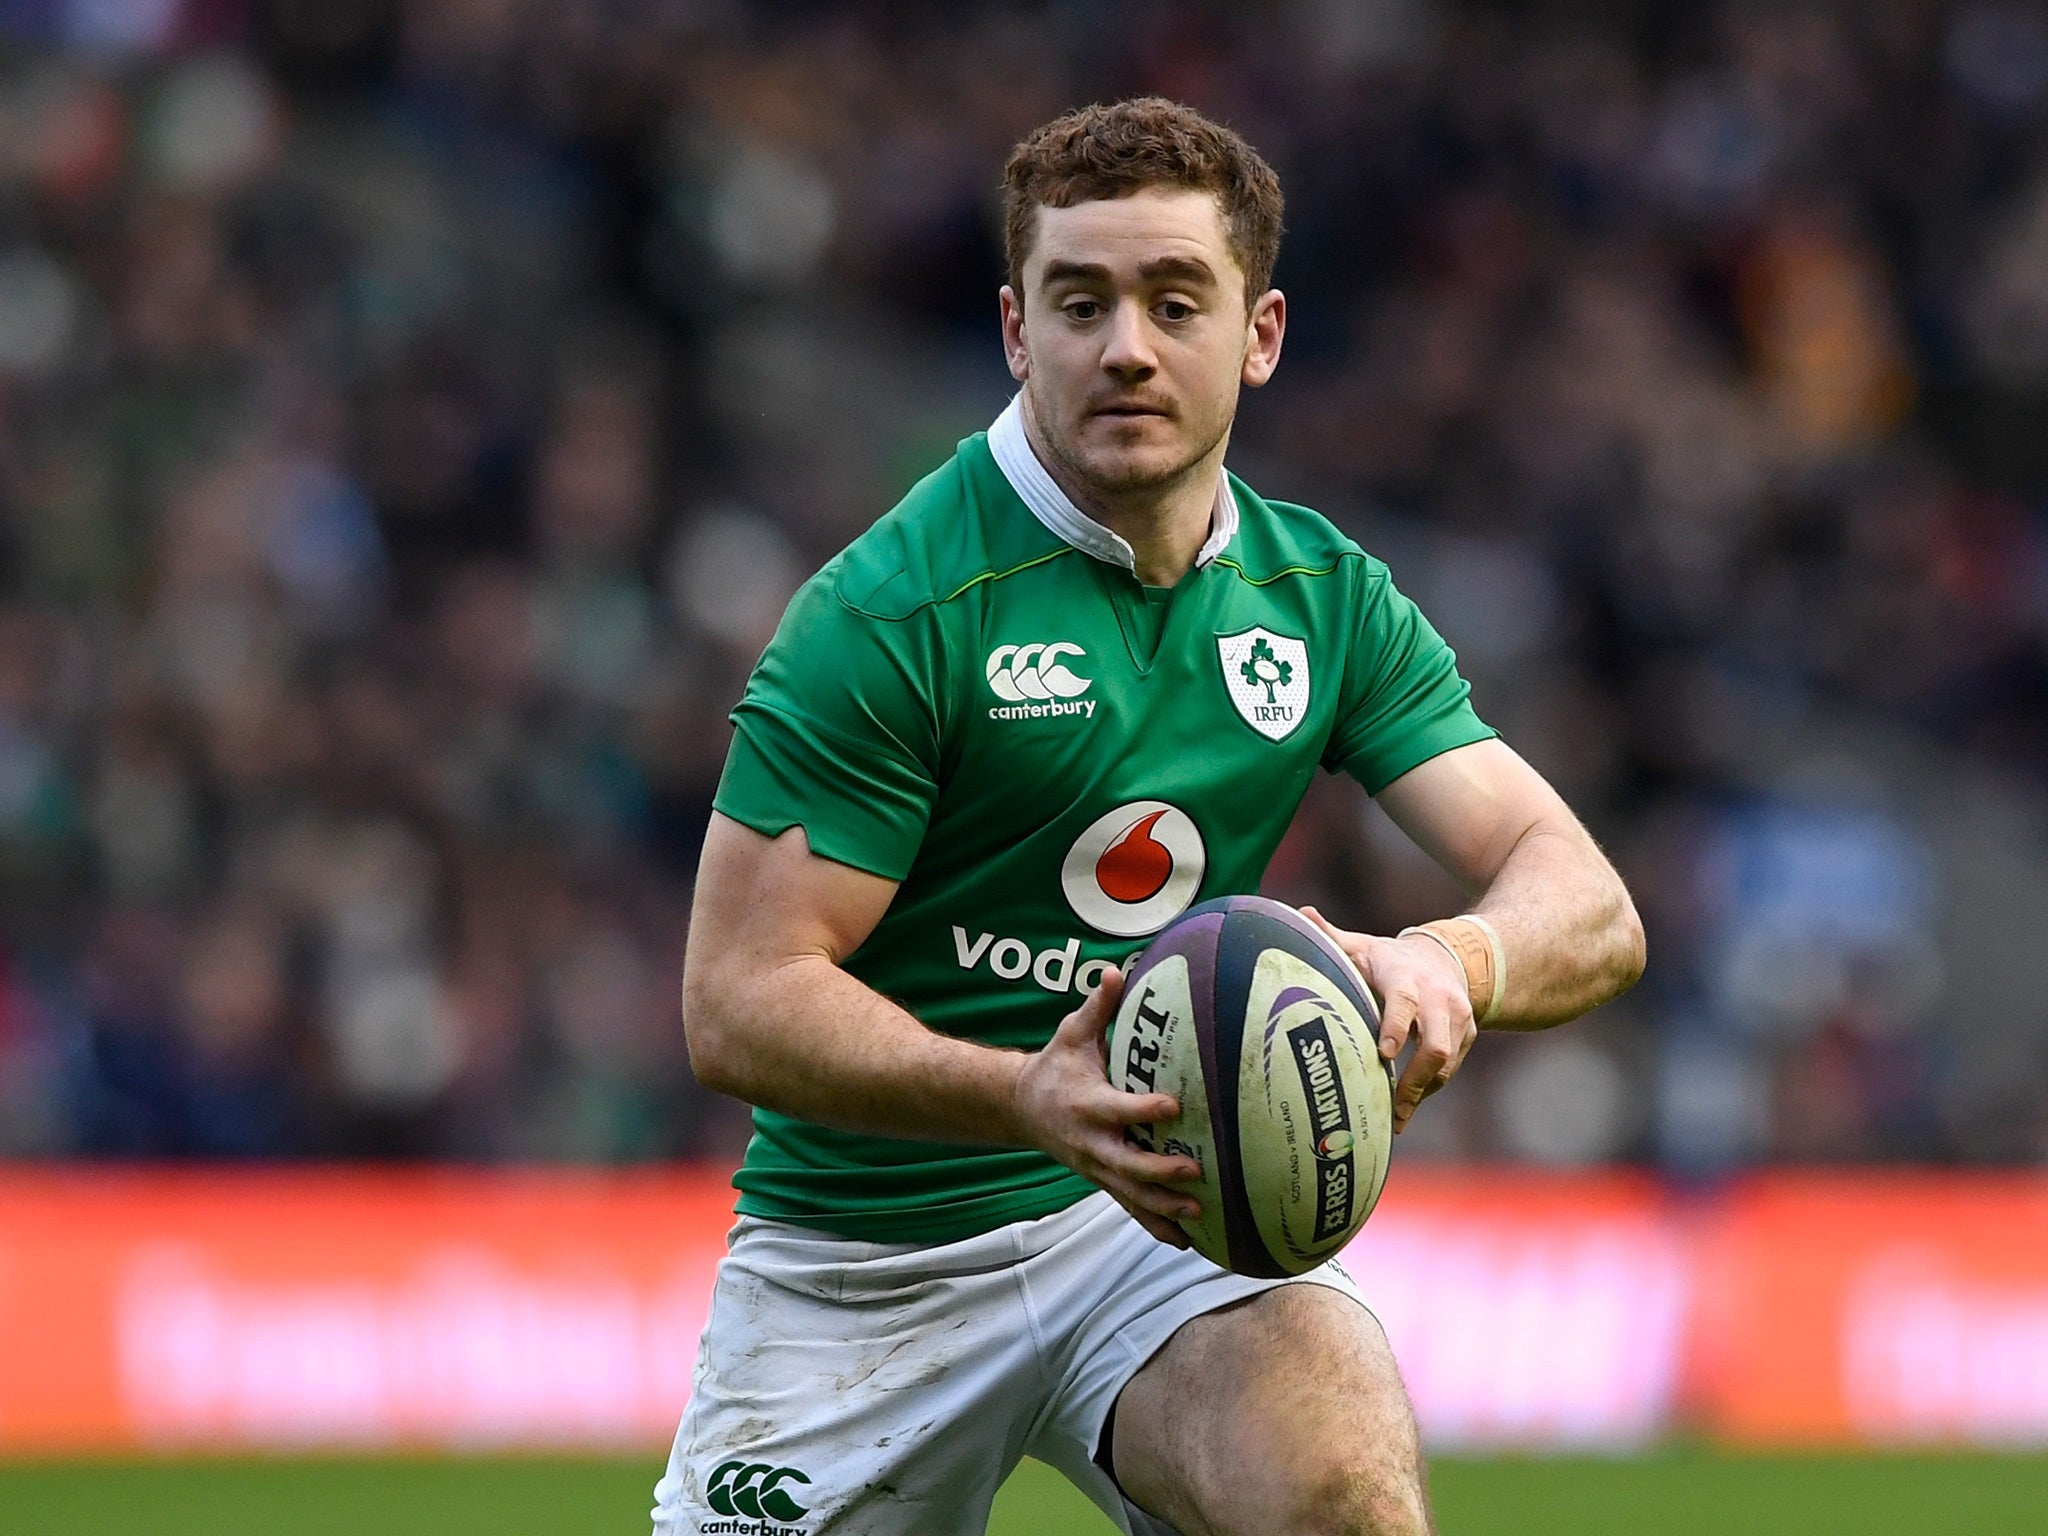 Paddy Jackson has agreed a two-year deal with Perpignan after being sacked by Ulster